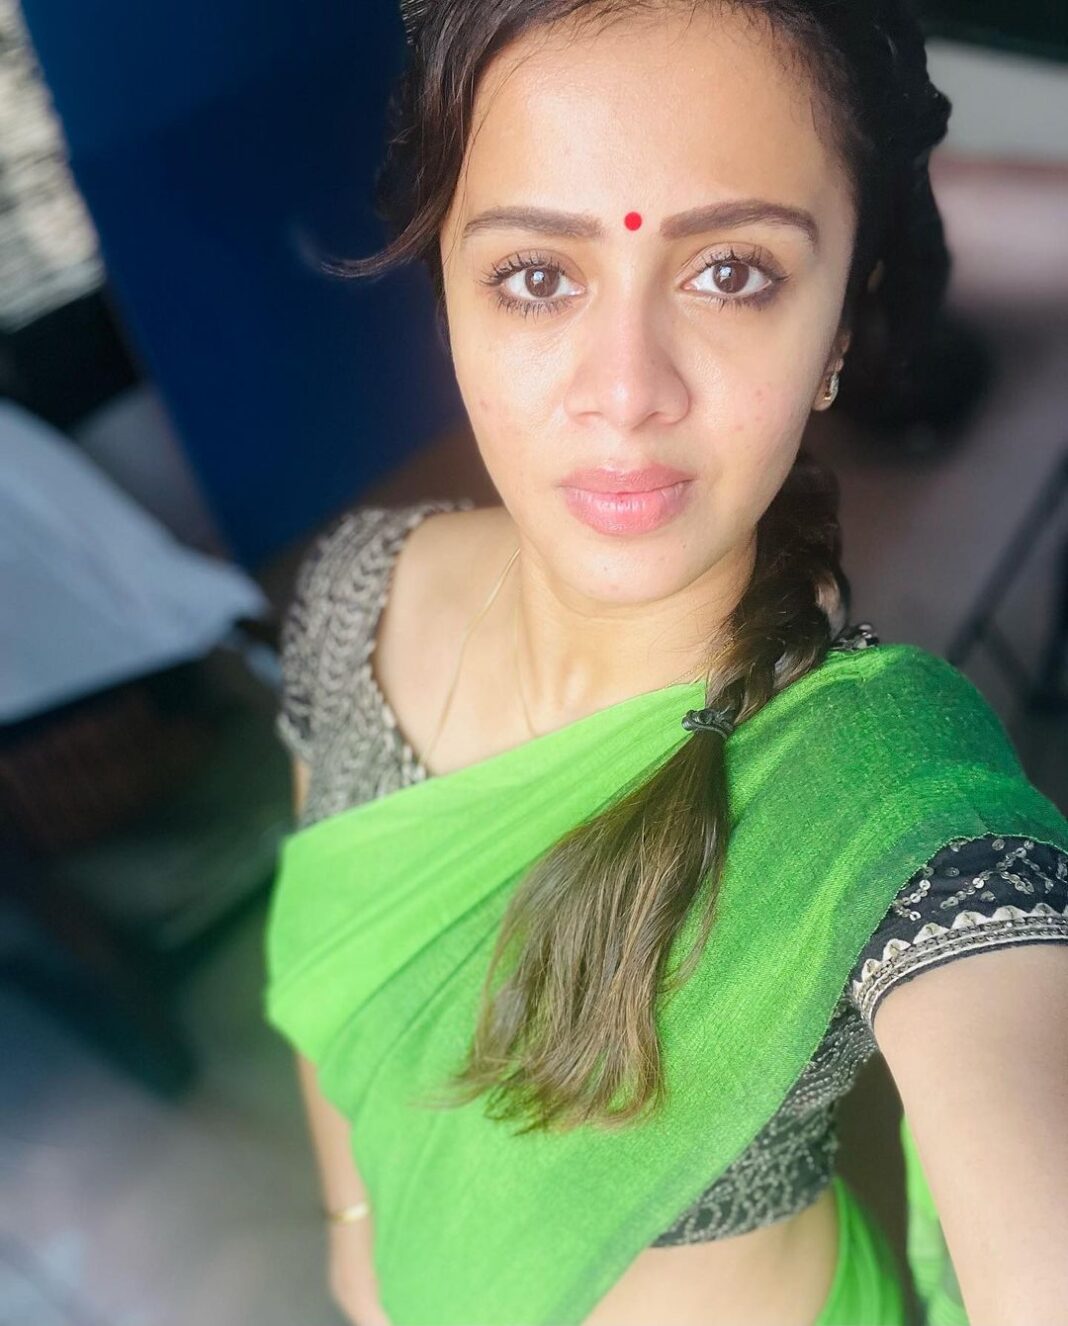 Anjana Rangan Instagram - This is the last selfie i took, before testing positive for Covid. Its been 14 days since i fell sick .. more than the sickness itself.. these 14 days was gruelling mentally. The first 3 days were awful. The fever,body pain and tiredness was something i have experienced never before. But slowly i got better. My health was getting better and better every single day. But my mental health wasnt that great.. as every single day passed, i was becoming more and more sad, felt bored and had nothing to do. Though it was the time for me to rest, all i could think about was the fact that i had to be like this for a fortnight. Tried painting, tried watching movies, series, tried everything possible to distract myself.. but nothing worked. I was at my loneliest self, not being able to see, talk or hug anyone esply my baby. I became aware that i was losing it. So much frustration that i had no one to actually talk to .. My husband was busy taking care of cooking, handling work at home, and taking care of R and also work outside, that he hardly had time or energy to talk to me. Though i shud have been extremely grateful and loving for whatever he was doing..my frustration was just building up. I kept complaining of having no time for myself before.. now i had all the time in the world but i cudnt enjoy one bit of it. Such is life! My heart was outside while I was trapped inside. I am not able to put in words, how i felt. Beginning of the year , all the work plans I had came to a standstill, Already strained relationships became even more strained, cudnt reach out to ppl to tell them how i feel, longest time without my baby.. With just couple of clothes to wear, no energy to even make myself look decent enough for myself.. no mood to keep myself active, I have been at my worst for the last 14 days. It will take days for me to rebuild myself , to look and feel confident. I was dreading this and dodged Covid for 2 years being extremely careful and safe, but it finally got me, catching me at my worst. *Contd on comment..*